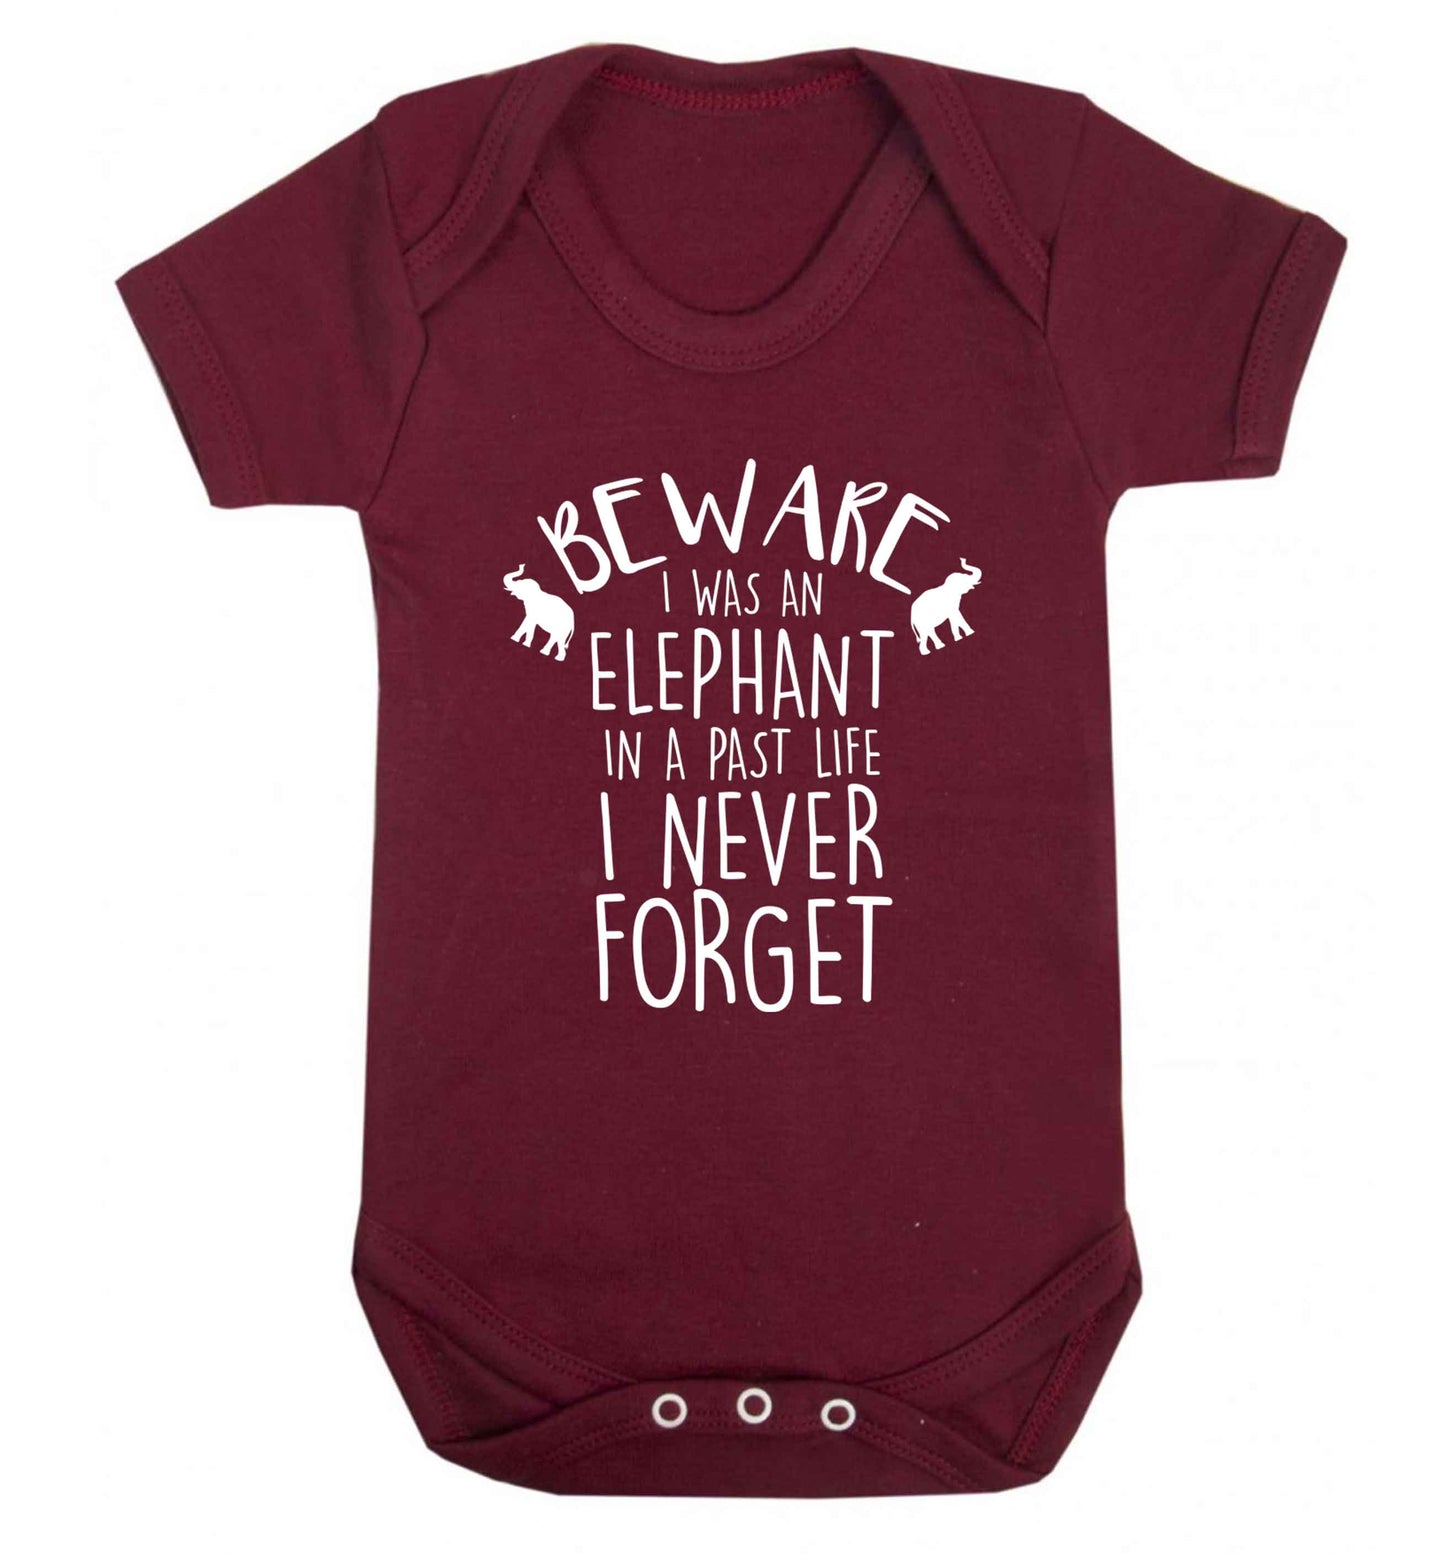 Beware I was an elephant in my past life I never forget Baby Vest maroon 18-24 months